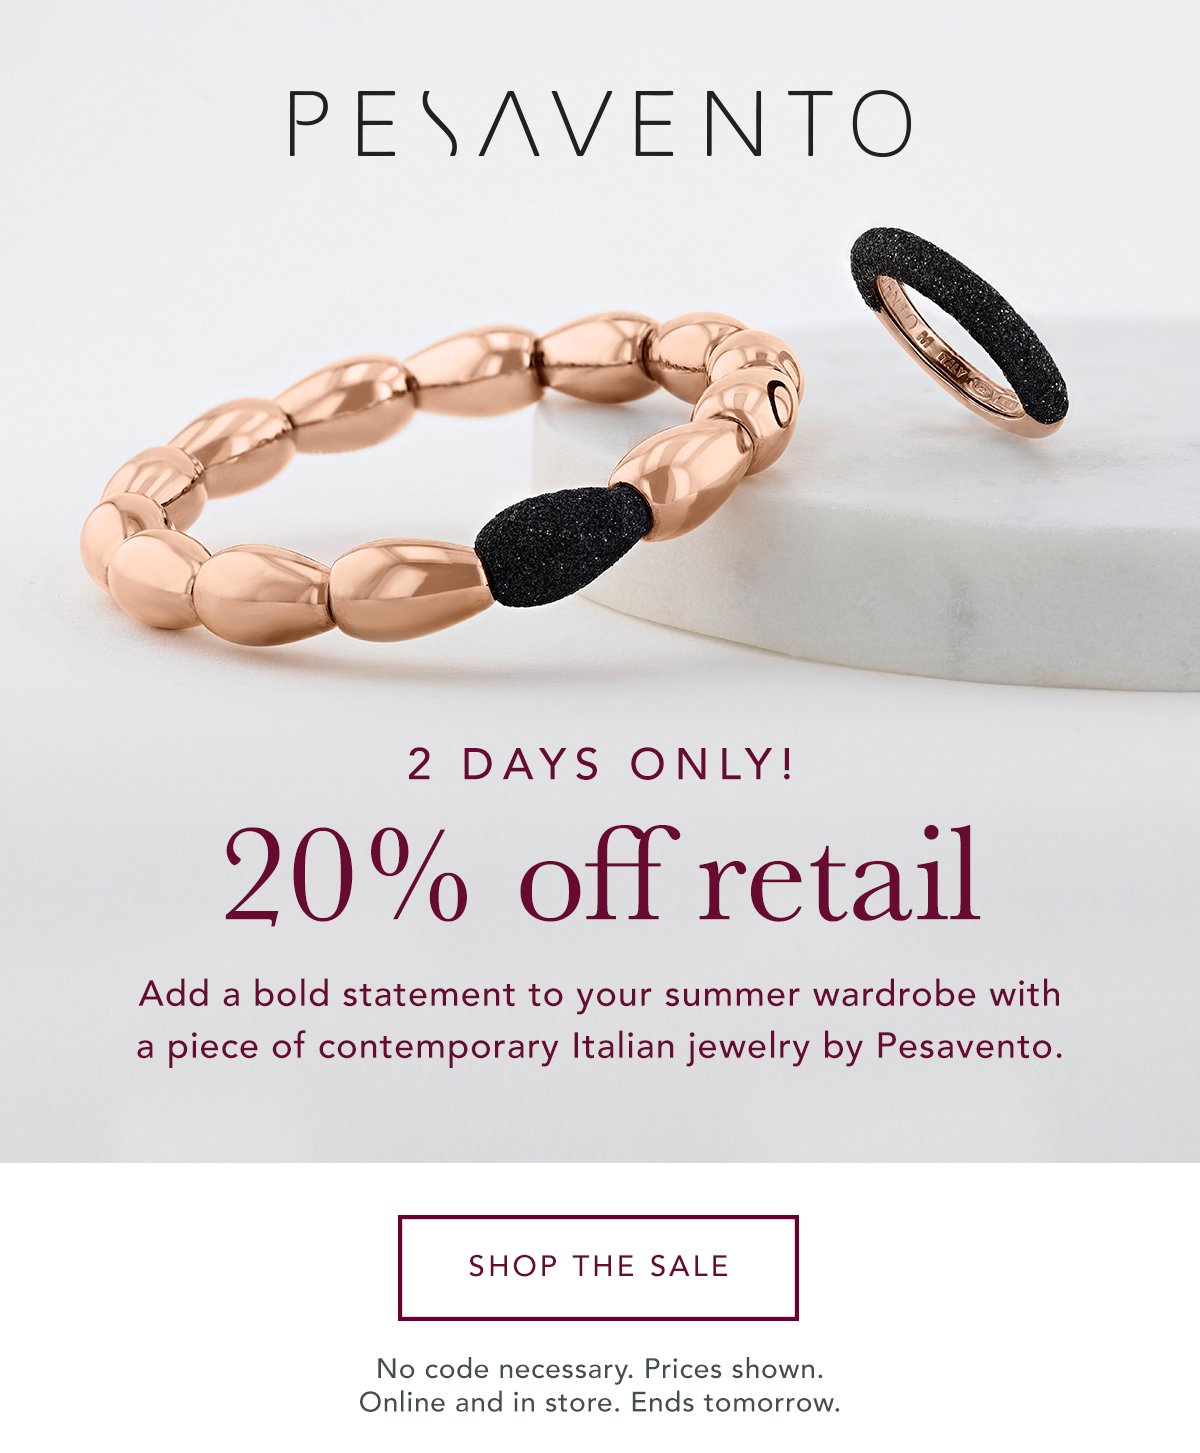 Borsheims Luxury Jewelry: days only: 20% off Pesavento jewelry | Milled